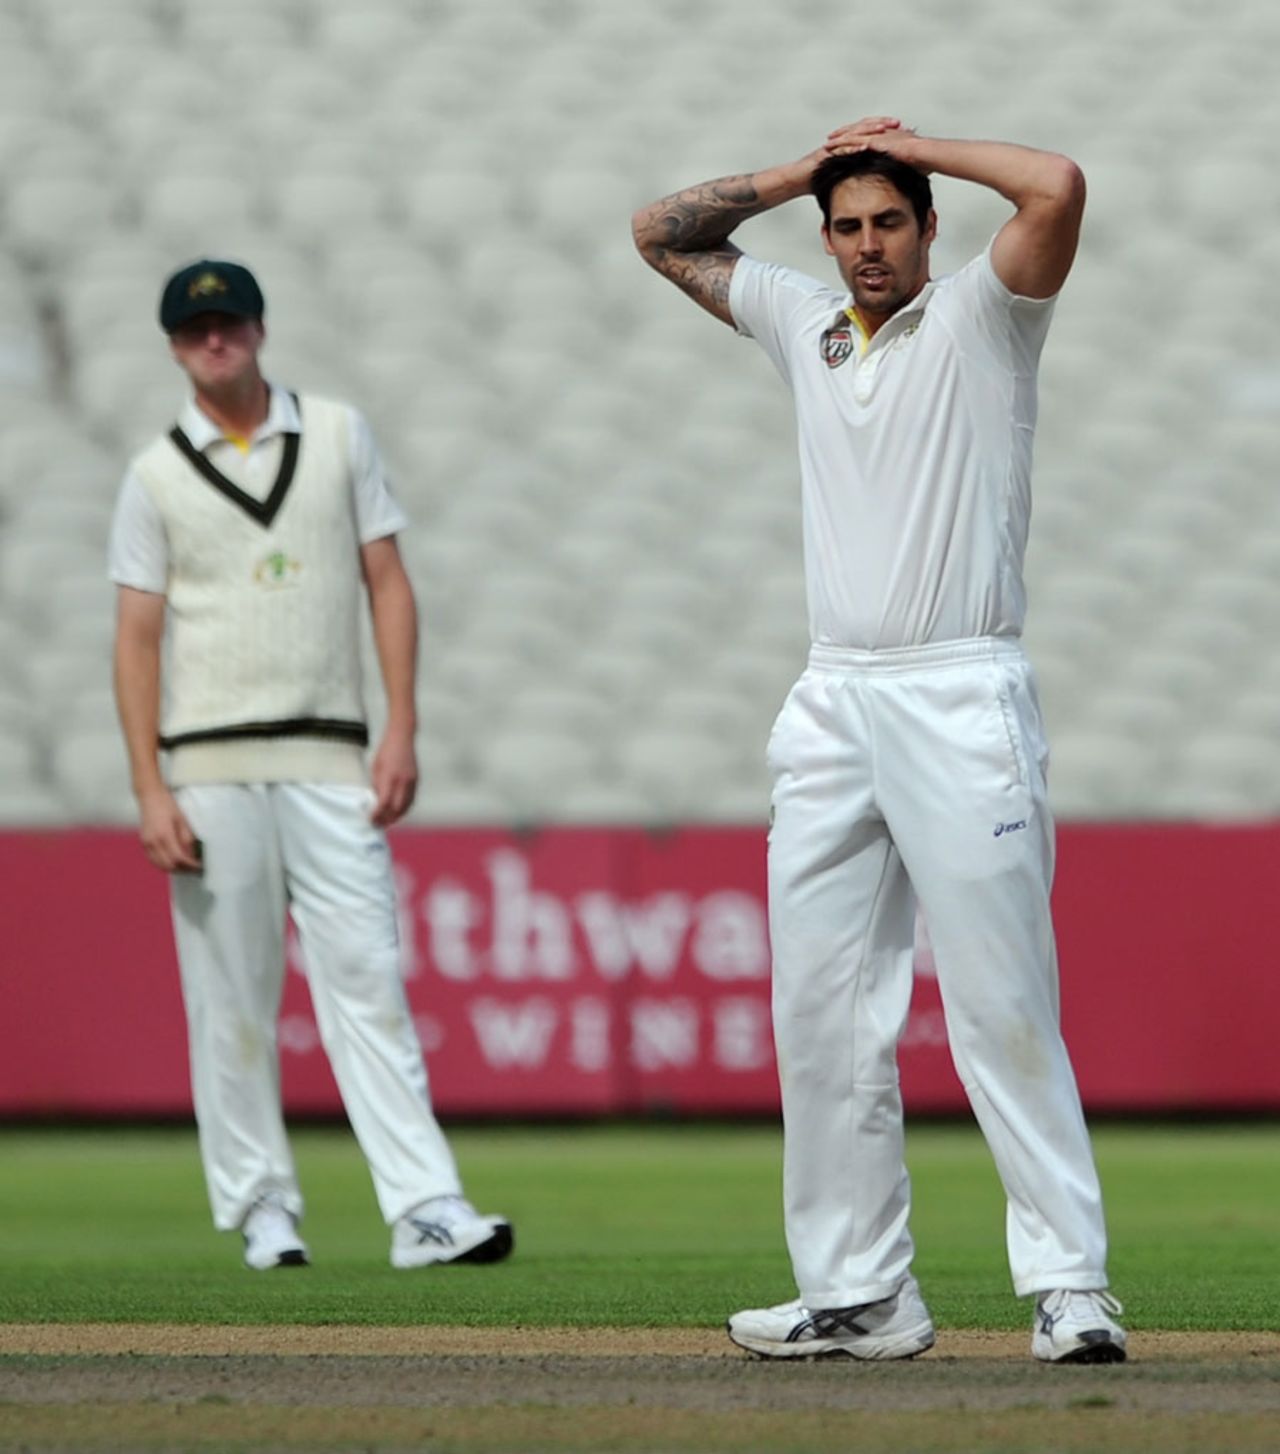 There were wickets as well as occasional frustration for Mitchell Johnson, England Lions v Australia A, 1st unofficial Test, Old Trafford, 1st day, August 7, 2012